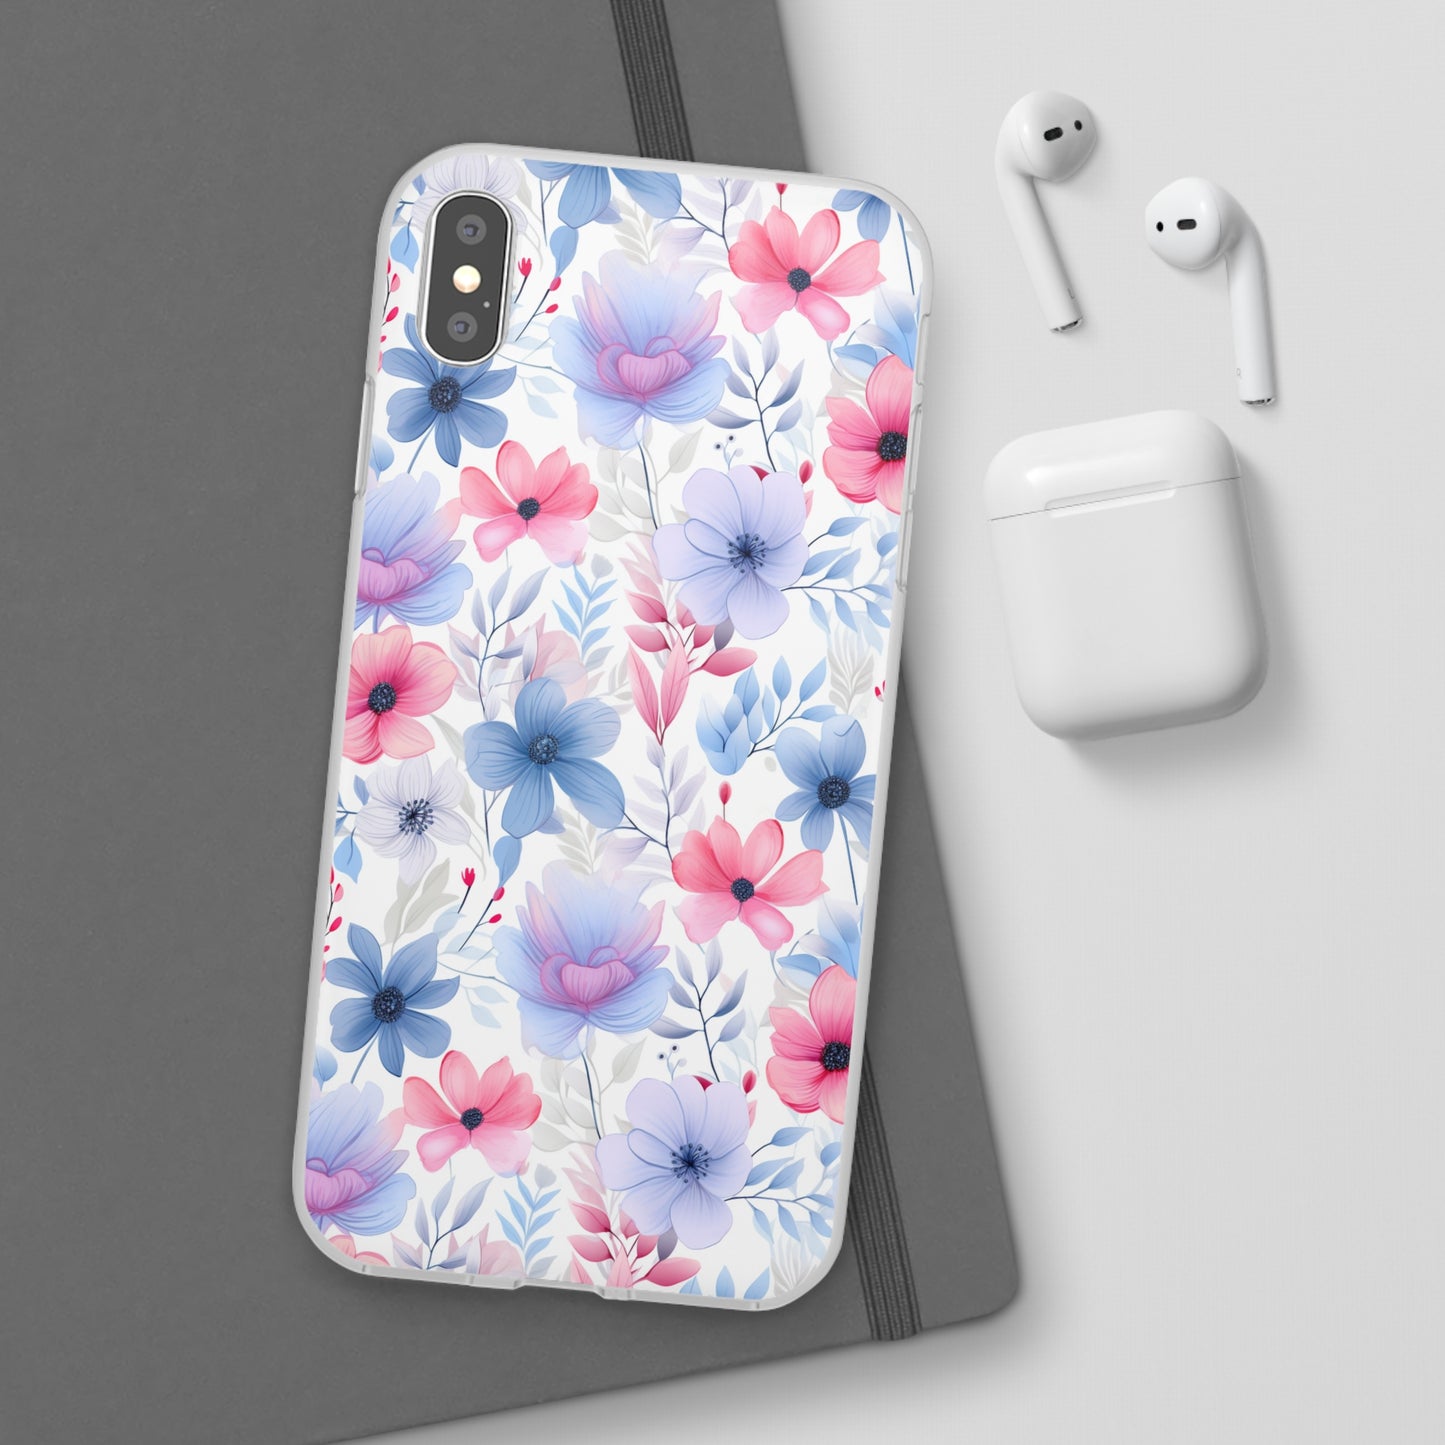 Floral Whispers - Soft Hues of Violets, Pinks, and Blues - Flexi Phone Case Phone Case Pattern Symphony iPhone XS MAX with gift packaging  